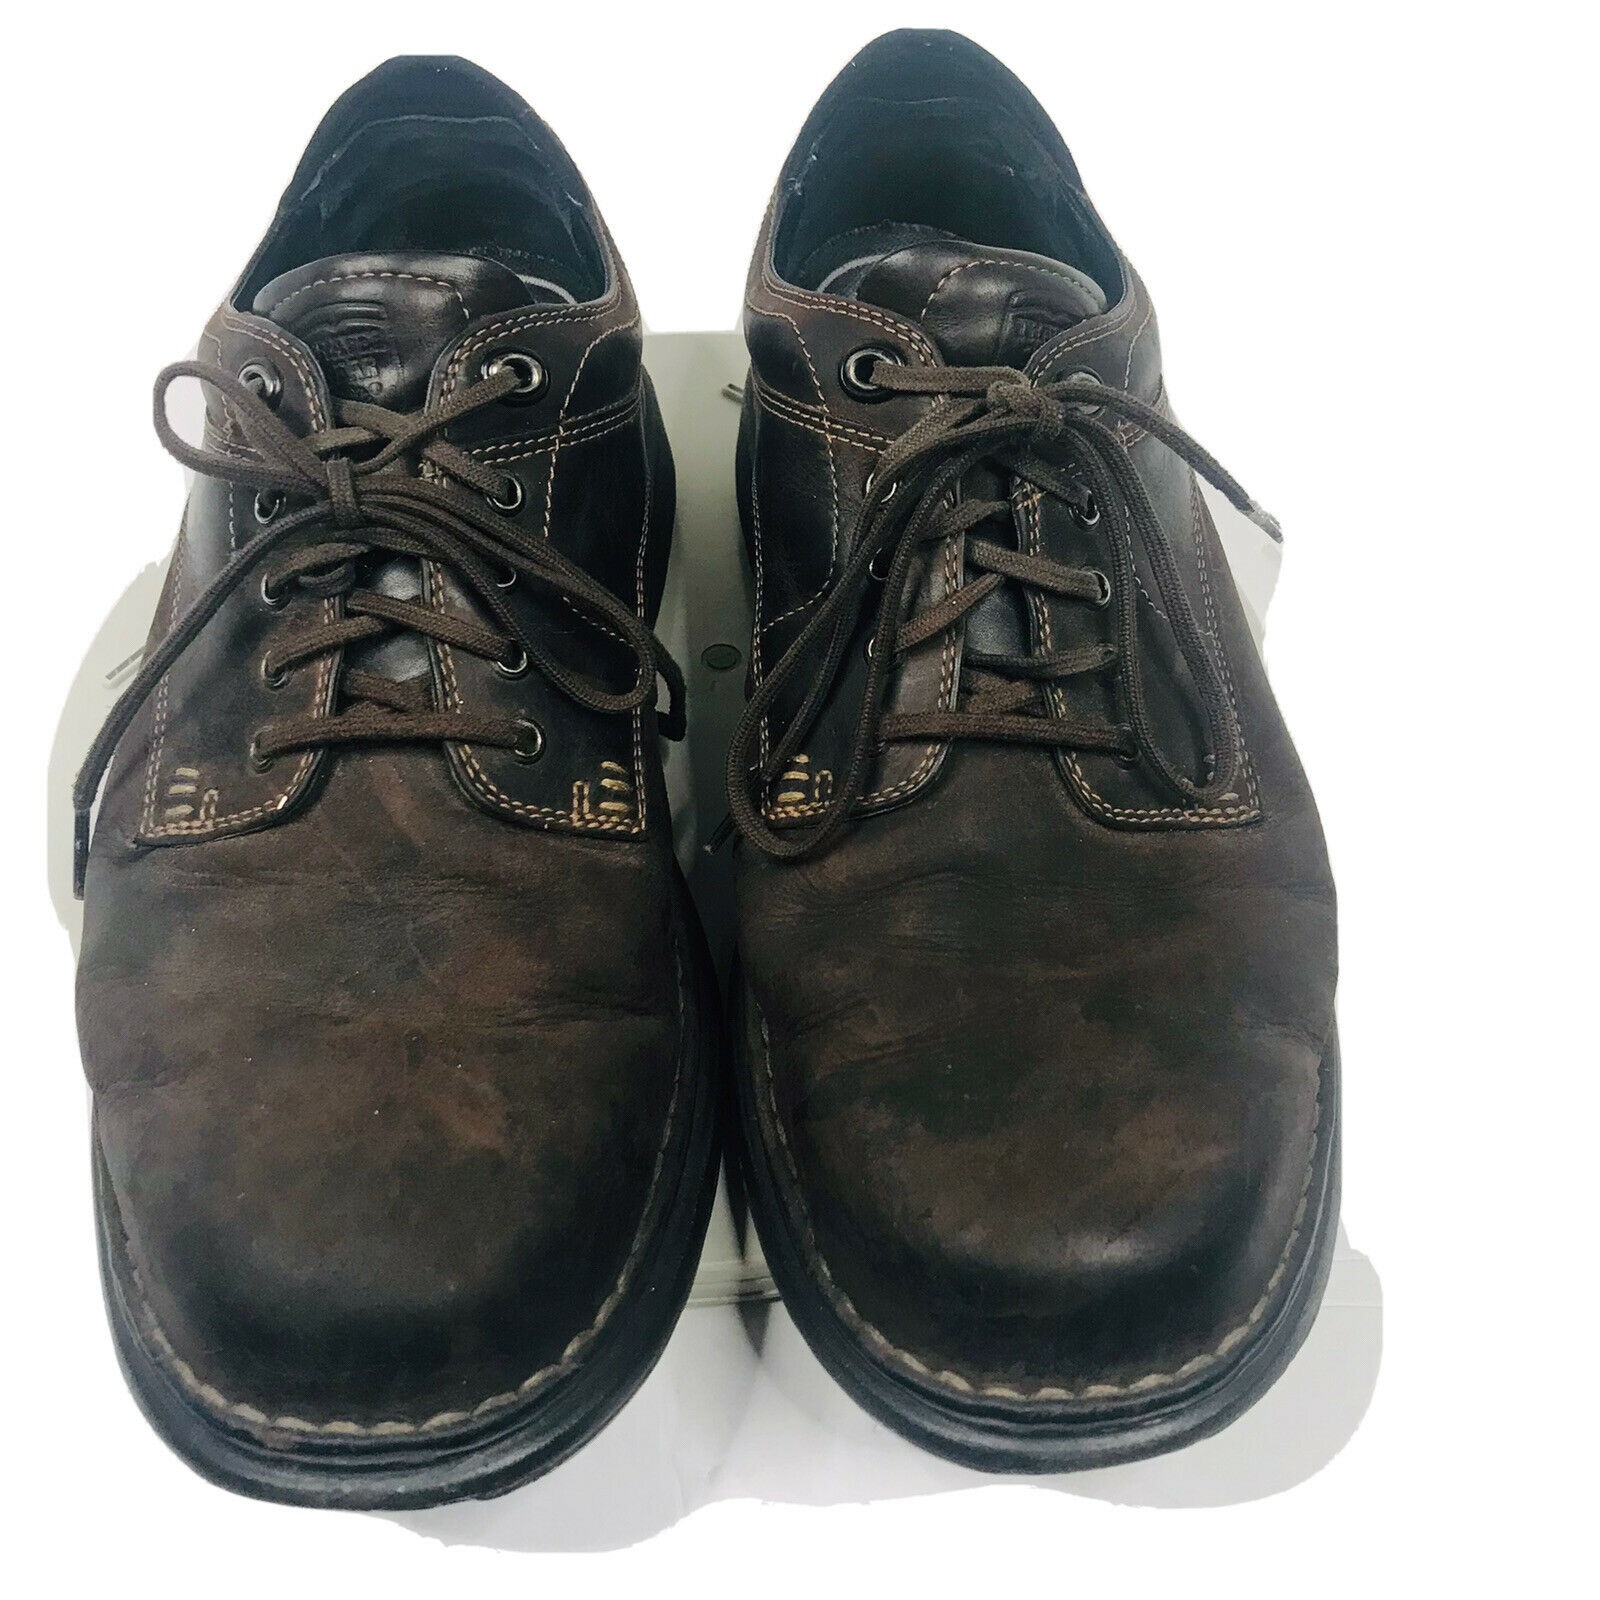 Timberland Smart Comfort Casual Shoes Men’s 12 M Leather Brown Lace Up Oxfords